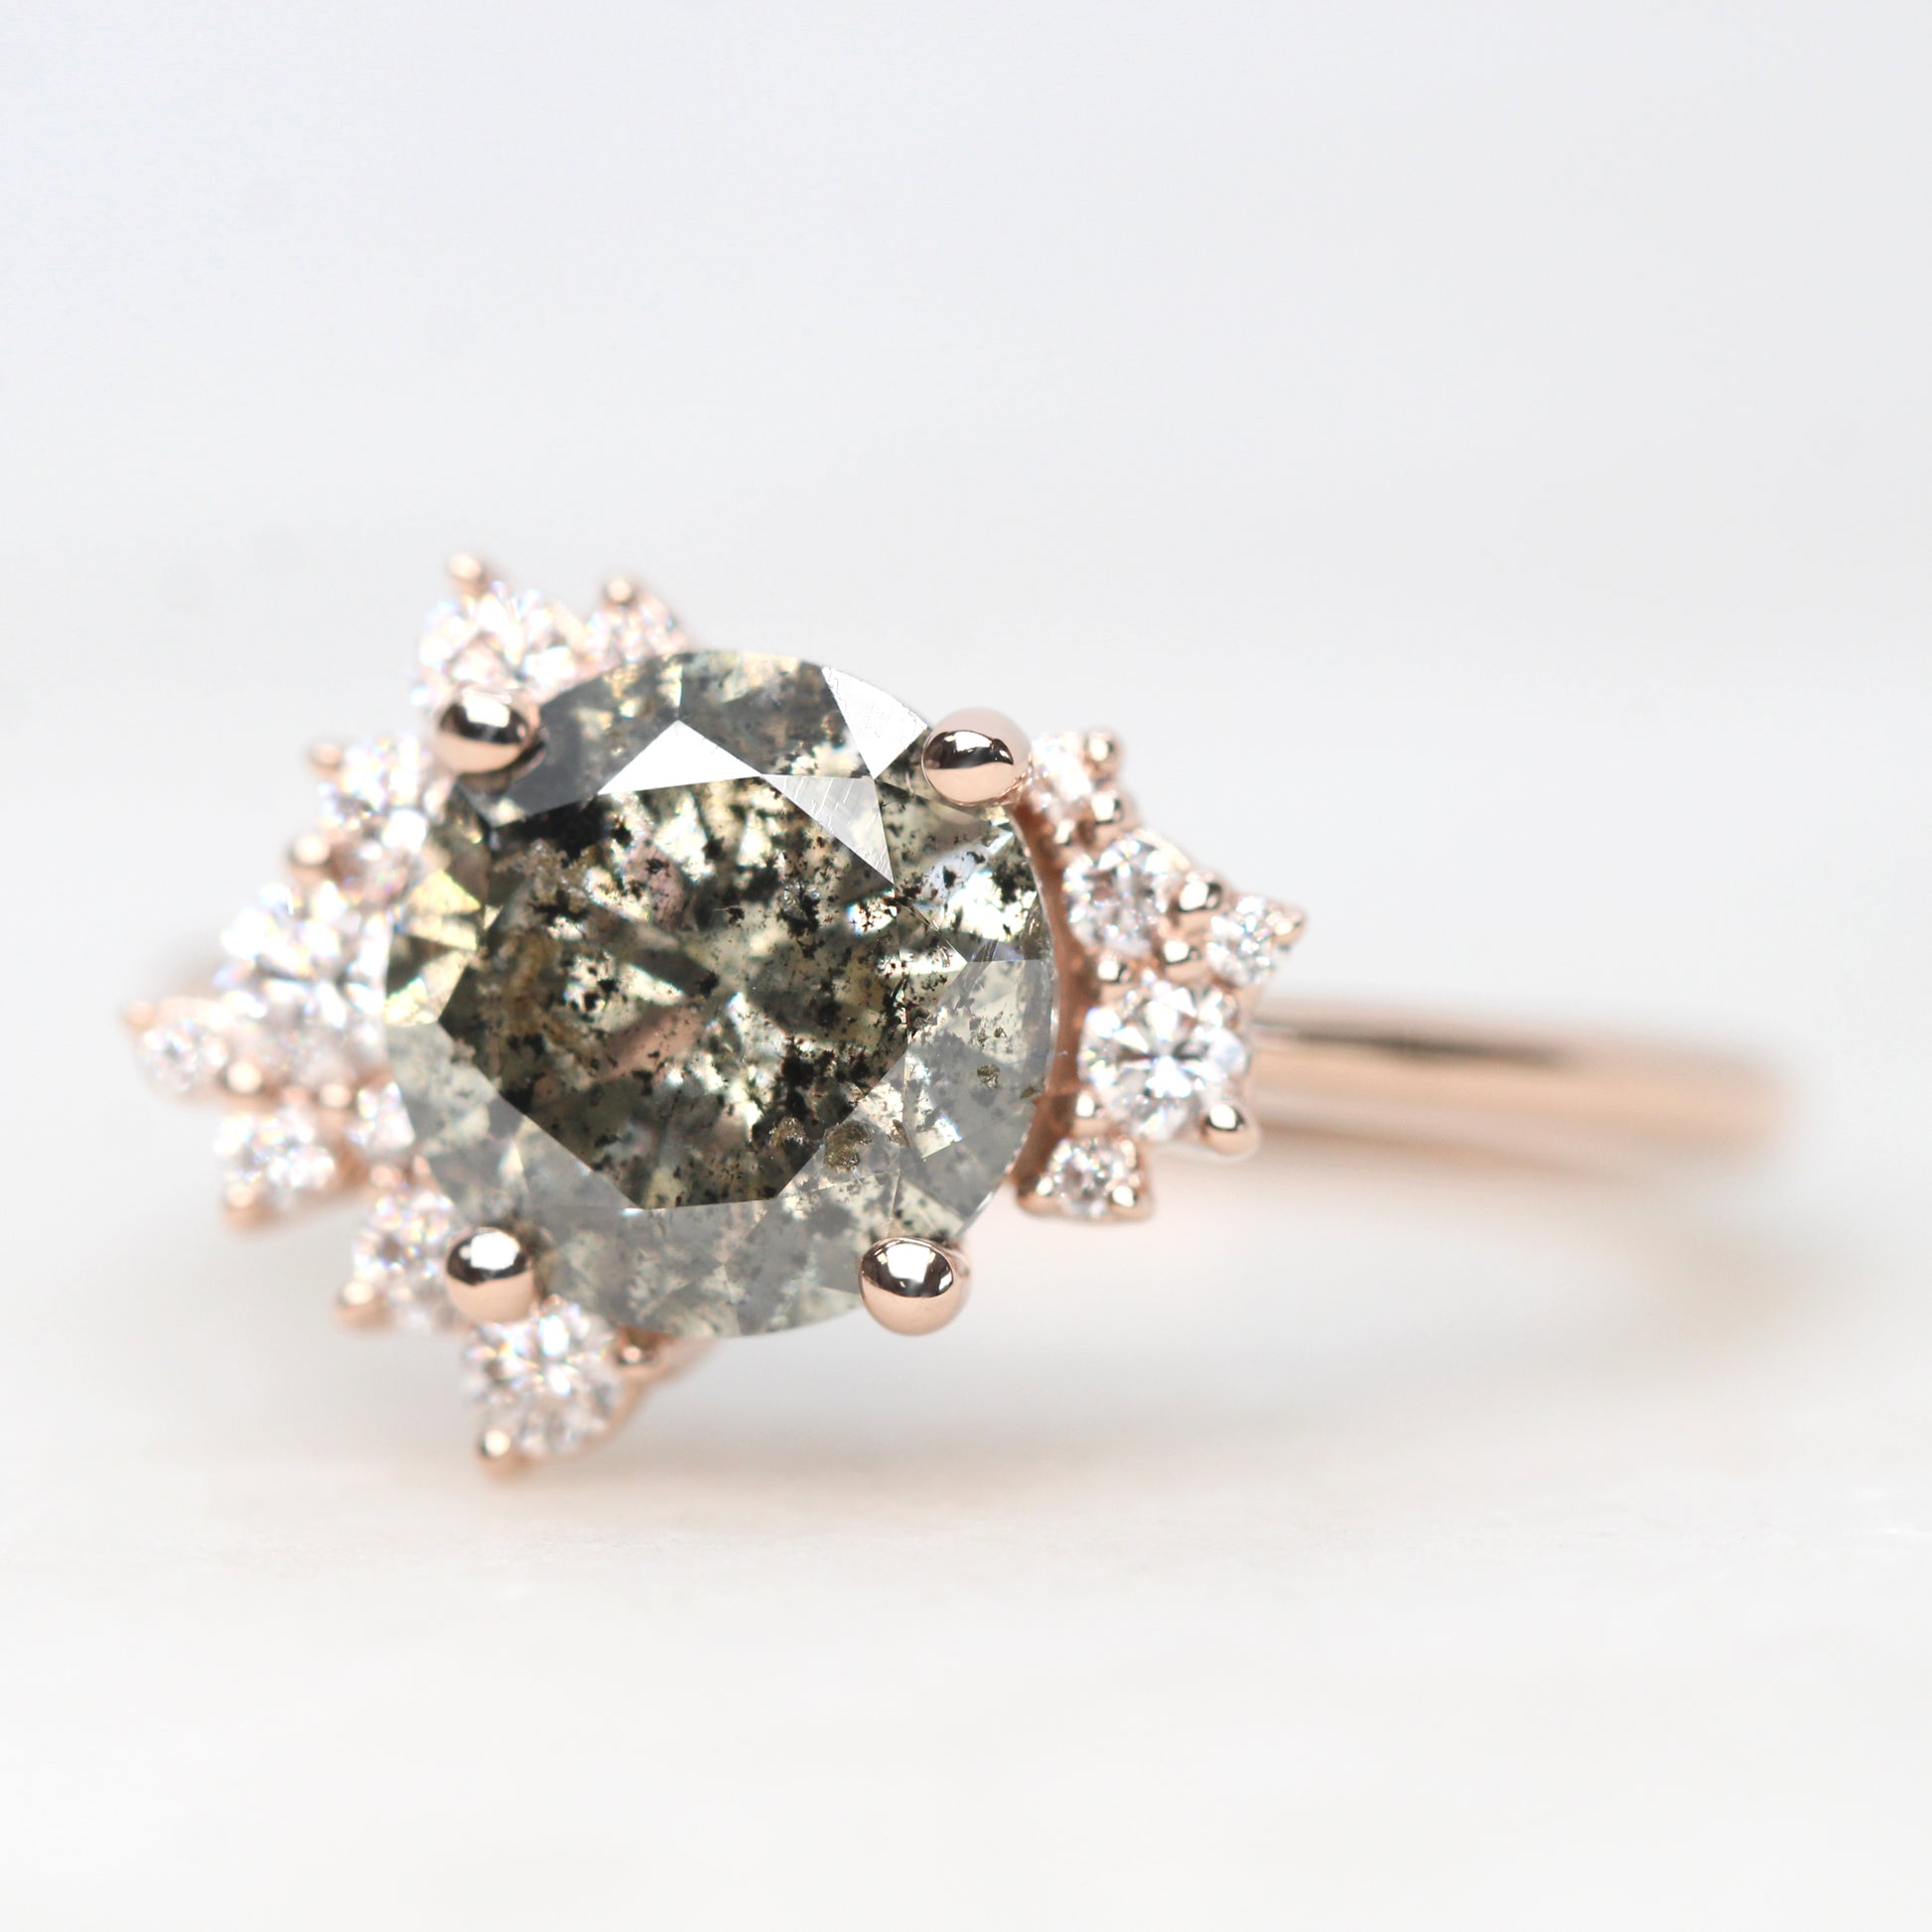 Orion Ring with a 2.08 Carat Round Dark Champagne Salt and Pepper Diamond and White Accent Diamonds in 14k Rose Gold - Ready to Size and Ship - Midwinter Co. Alternative Bridal Rings and Modern Fine Jewelry